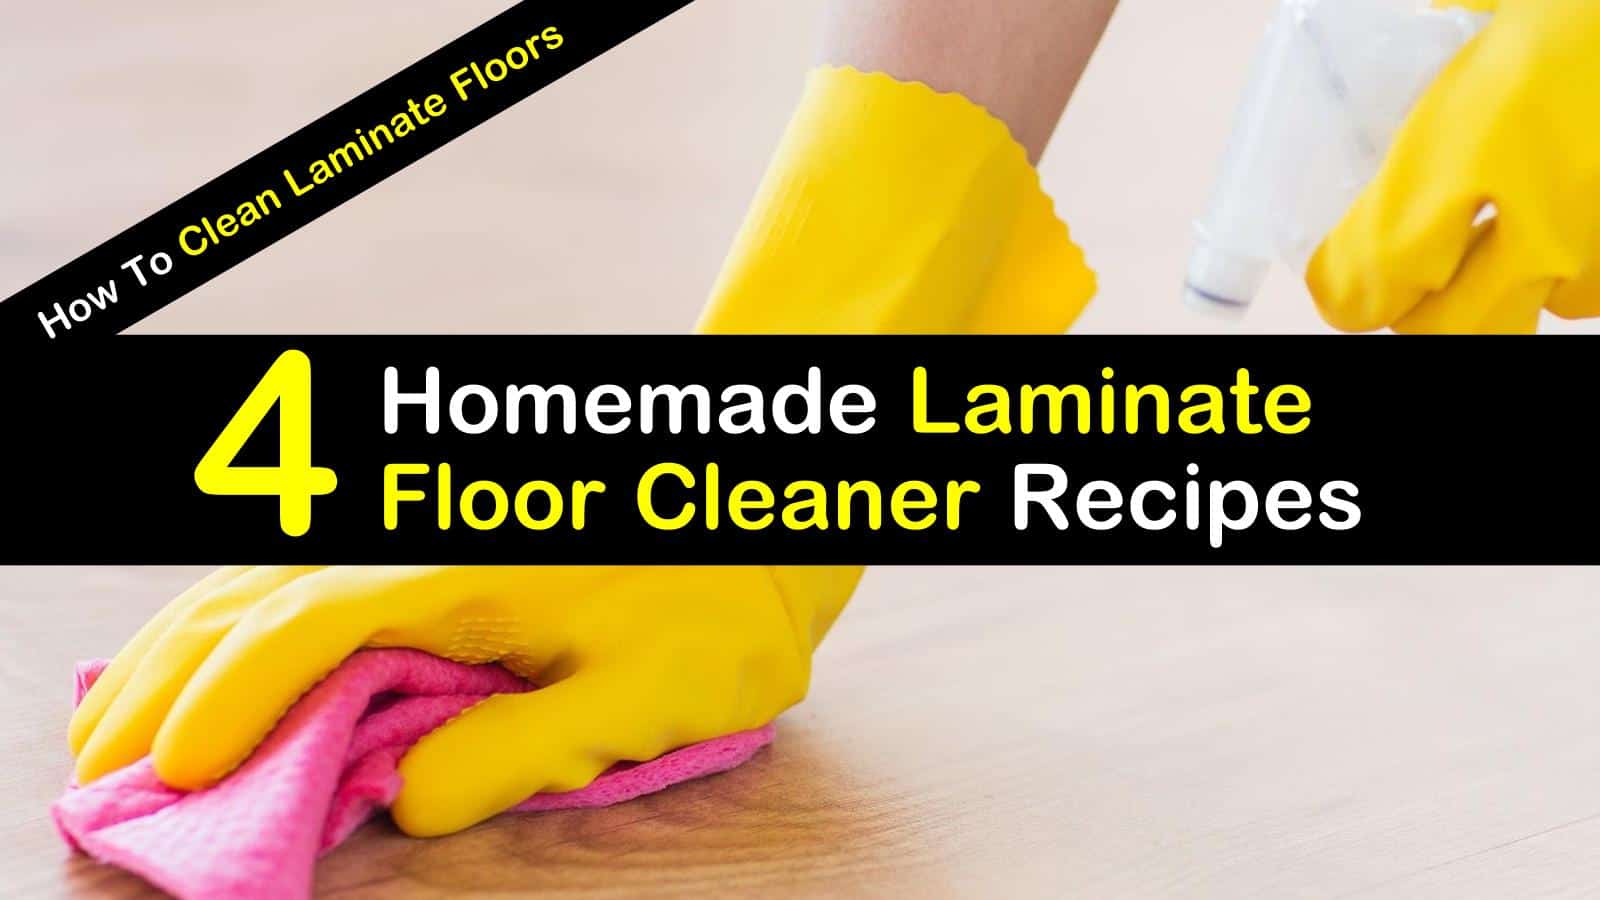 How To Clean Laminate Floors 4, Can You Use Rubbing Alcohol To Clean Laminate Floors